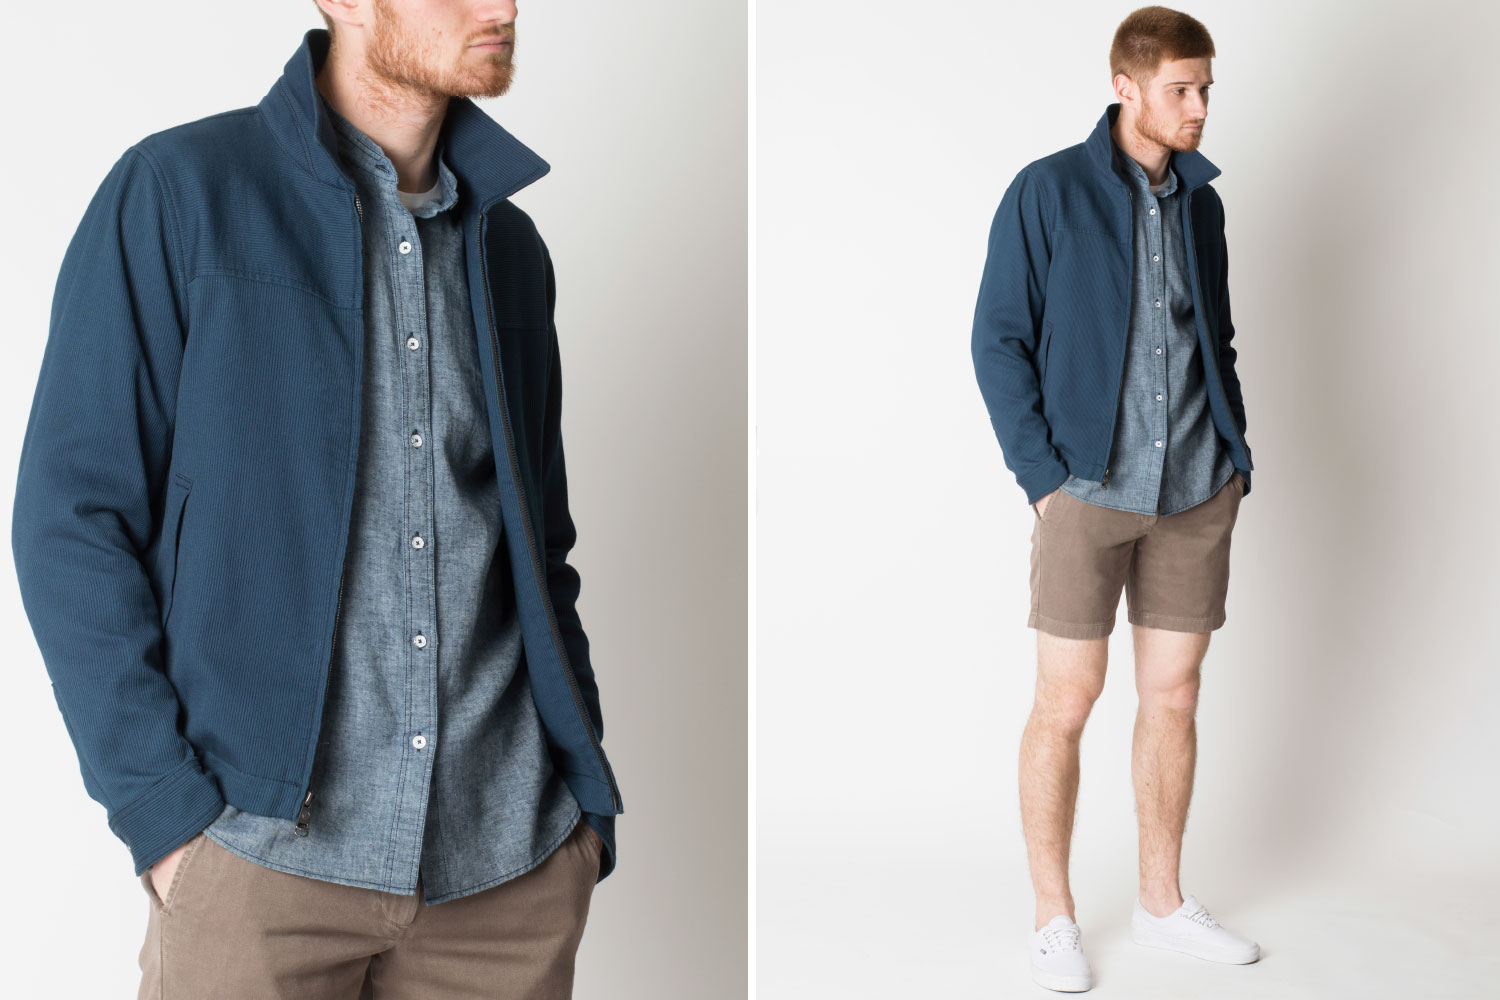 navy jacket chambray button down shirt and shorts by ONS Clothing